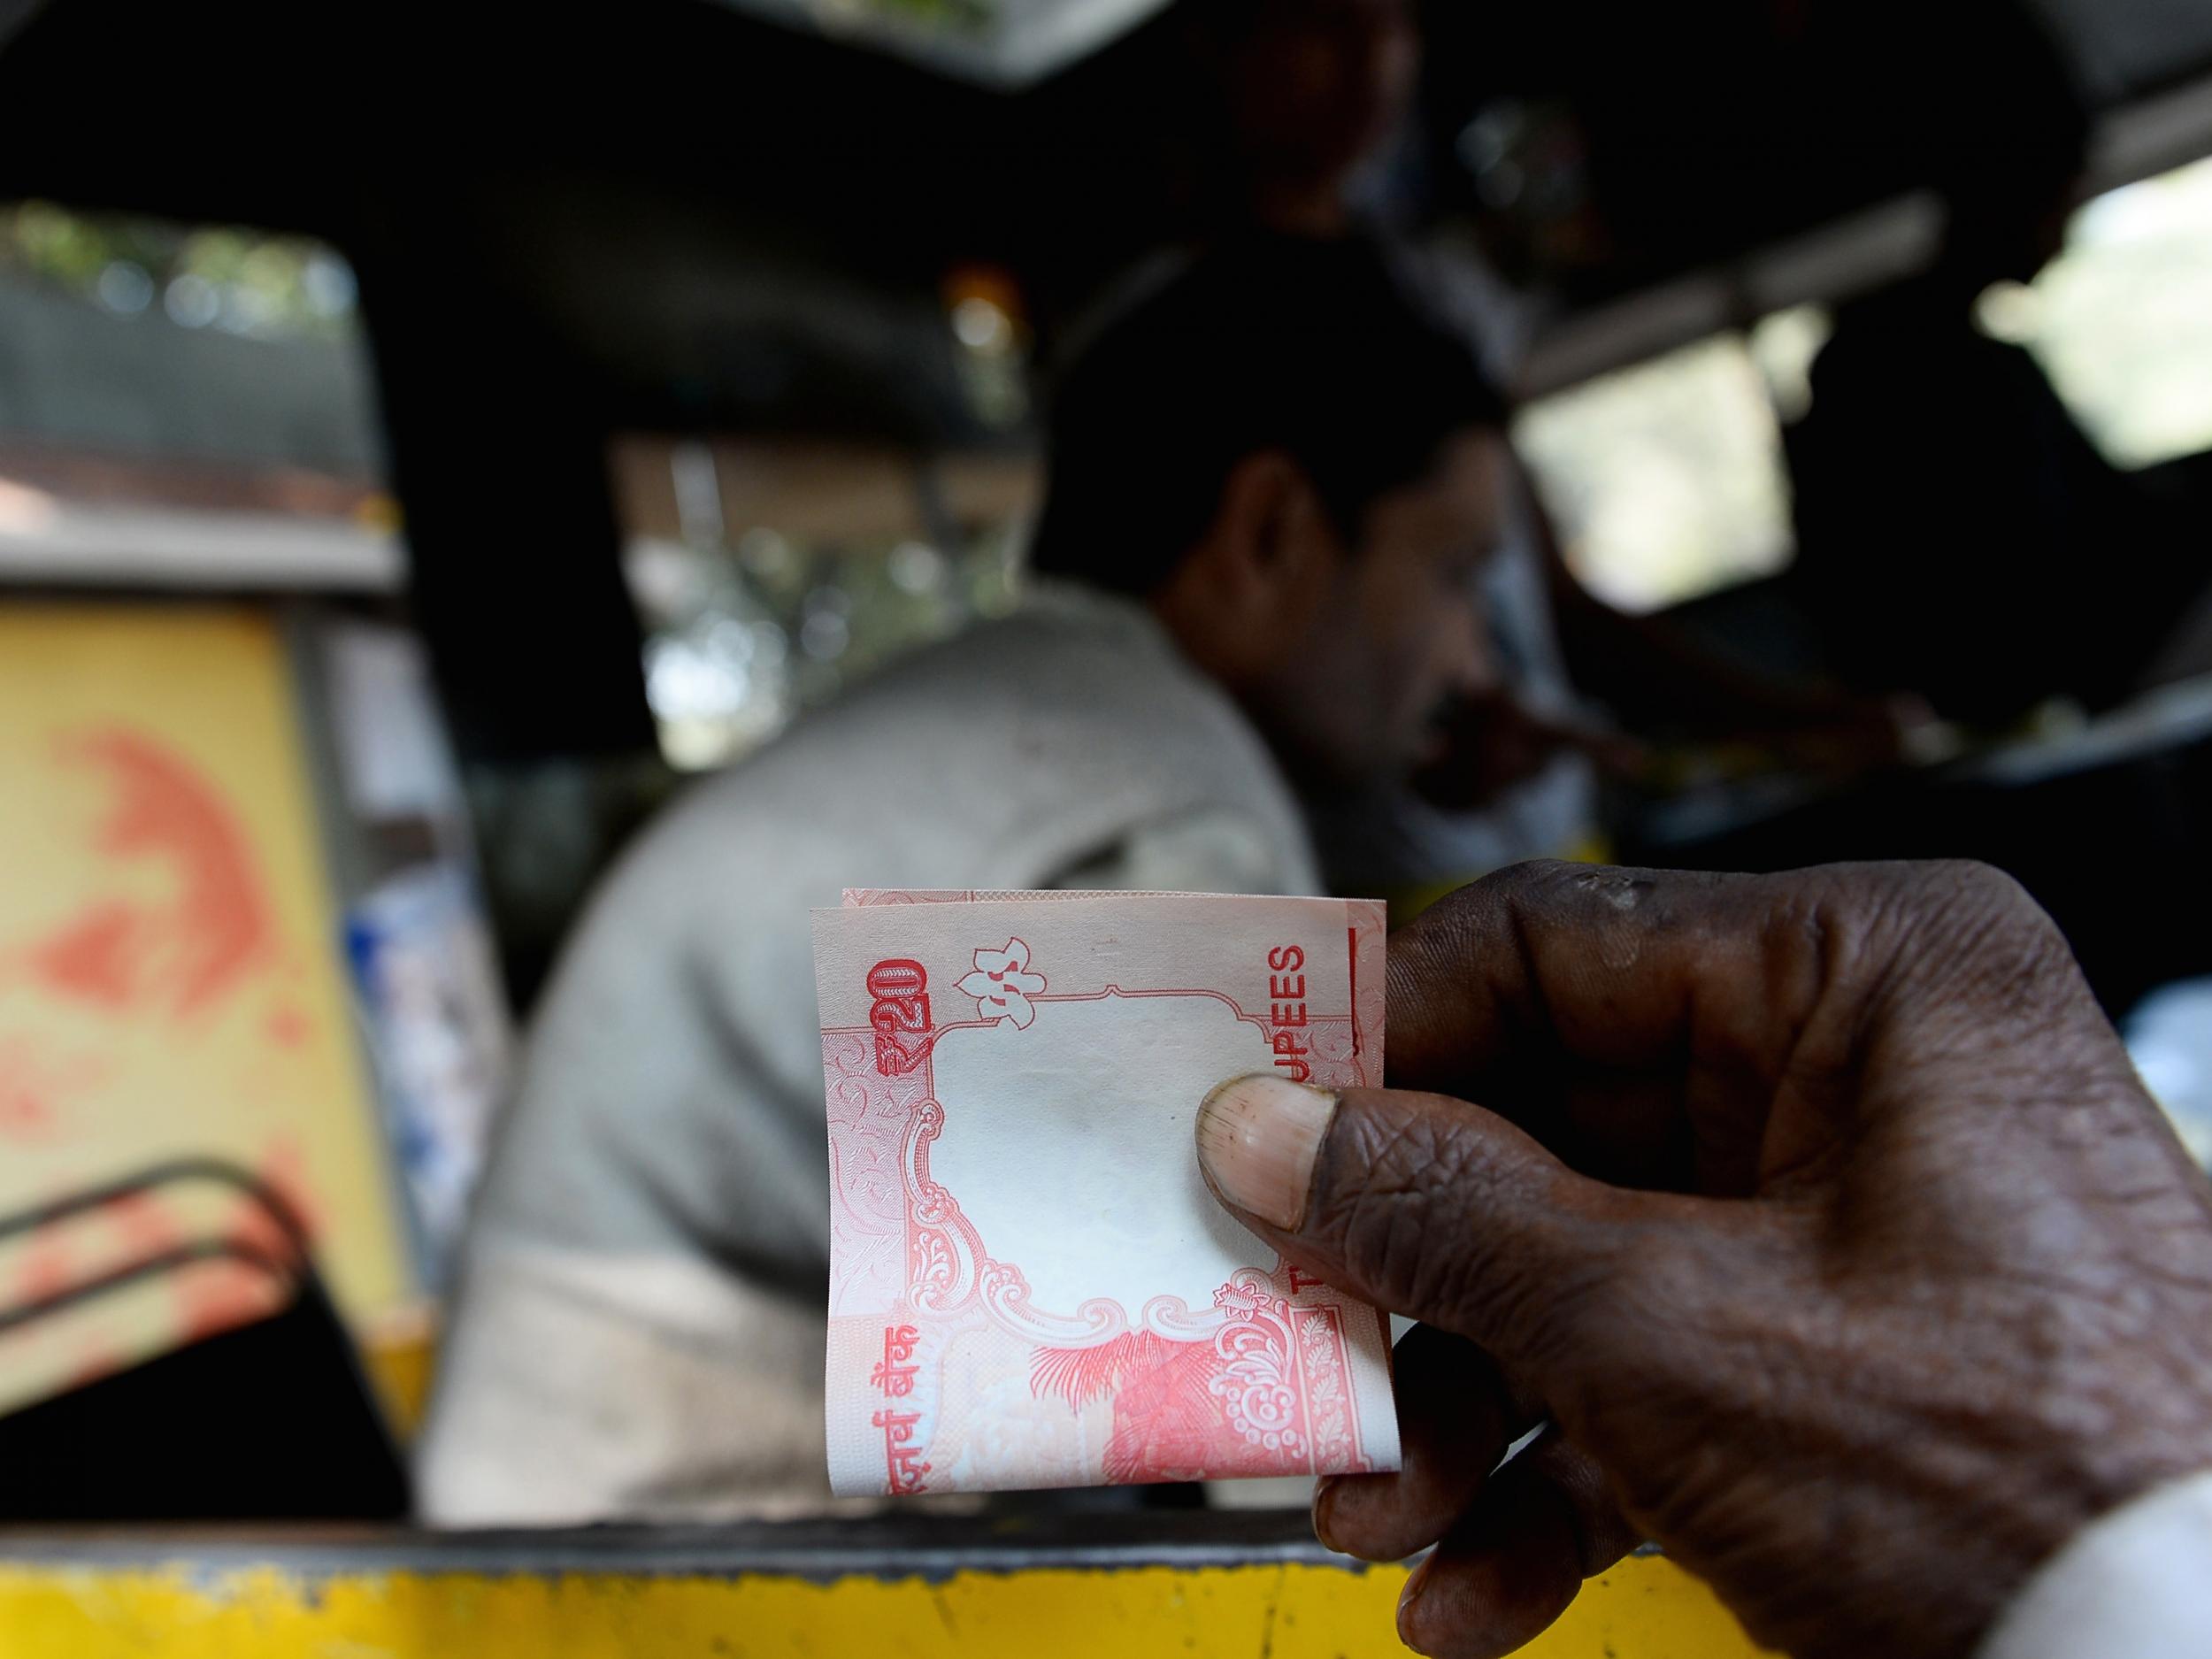 An Indian customer holds a twenty rupee note at a food stall in New Delhi